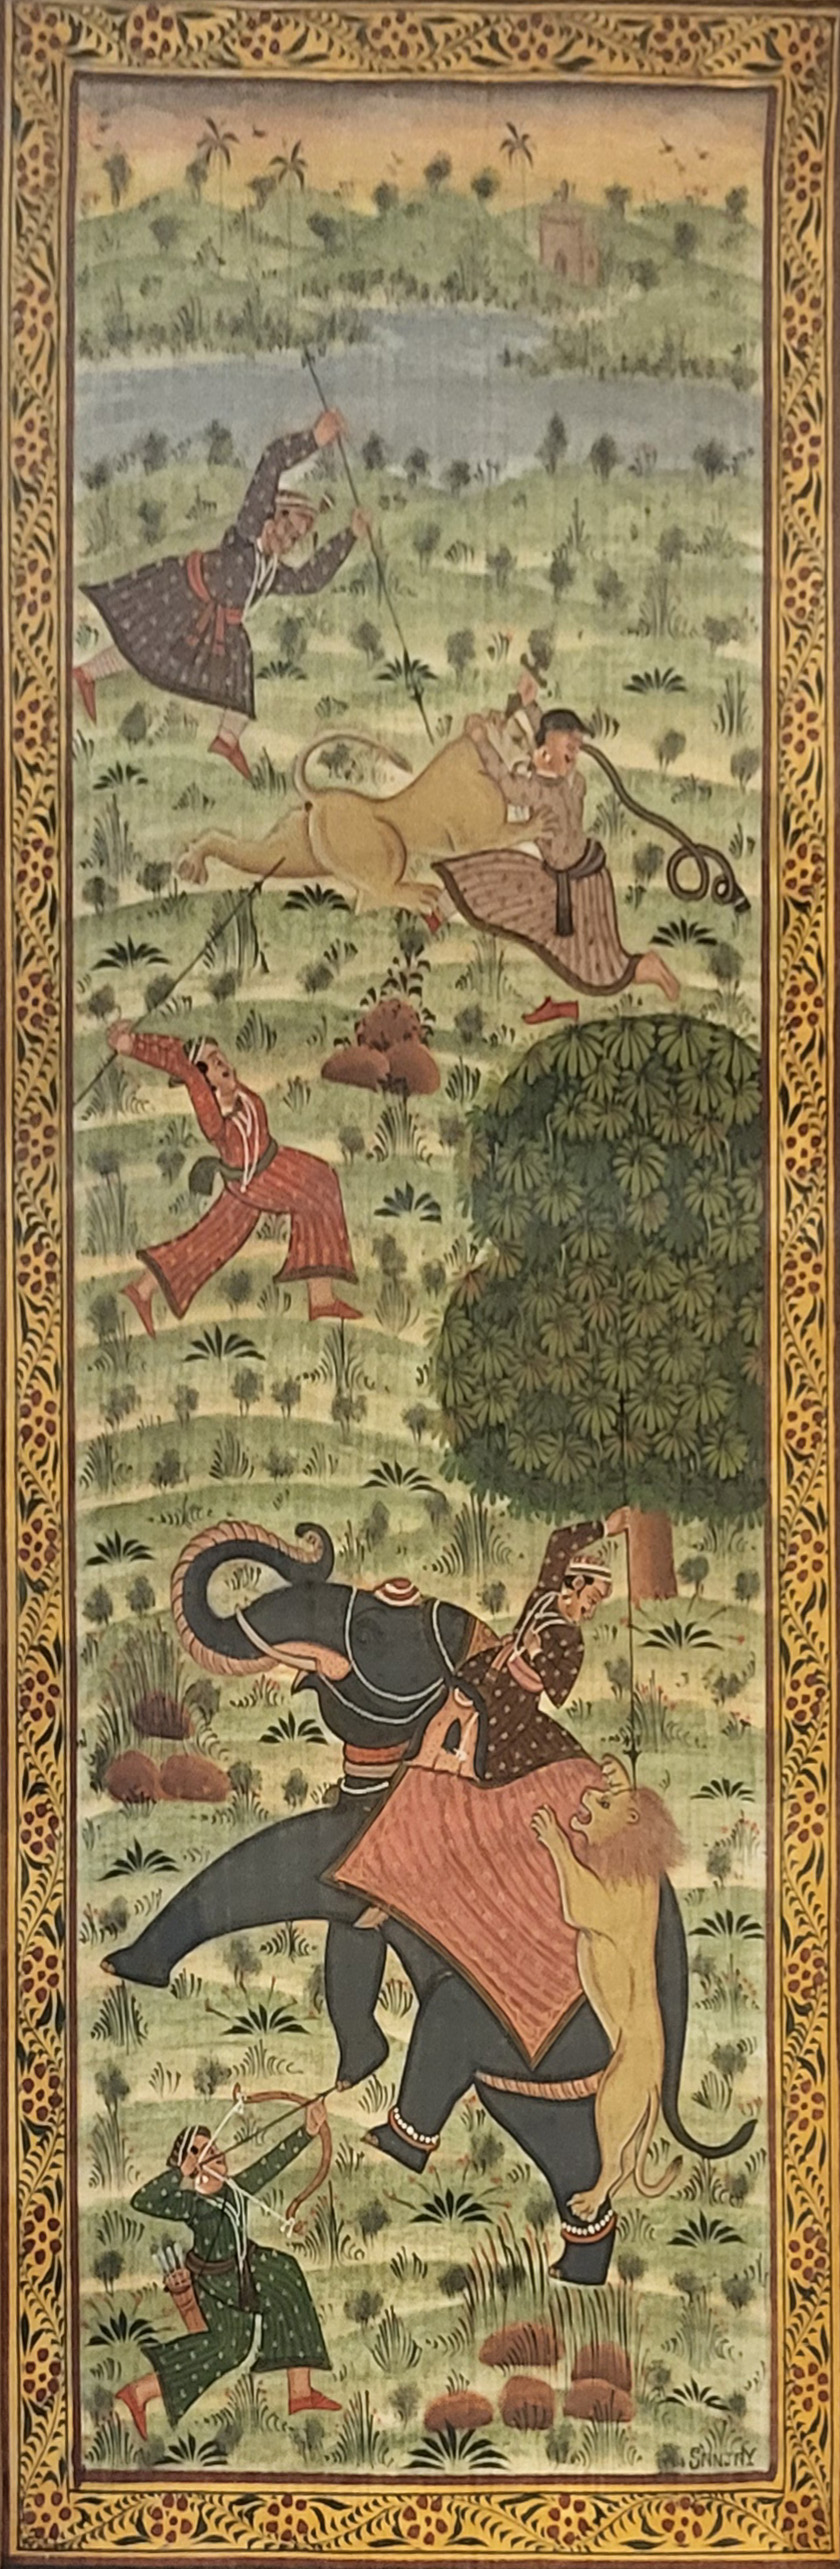 A 20TH CENTURY INDIAN SILK PAINTING, DEPICTING ORNATELY DRESSED NATIVES BATTLING A LION AND TIGER - Image 2 of 7